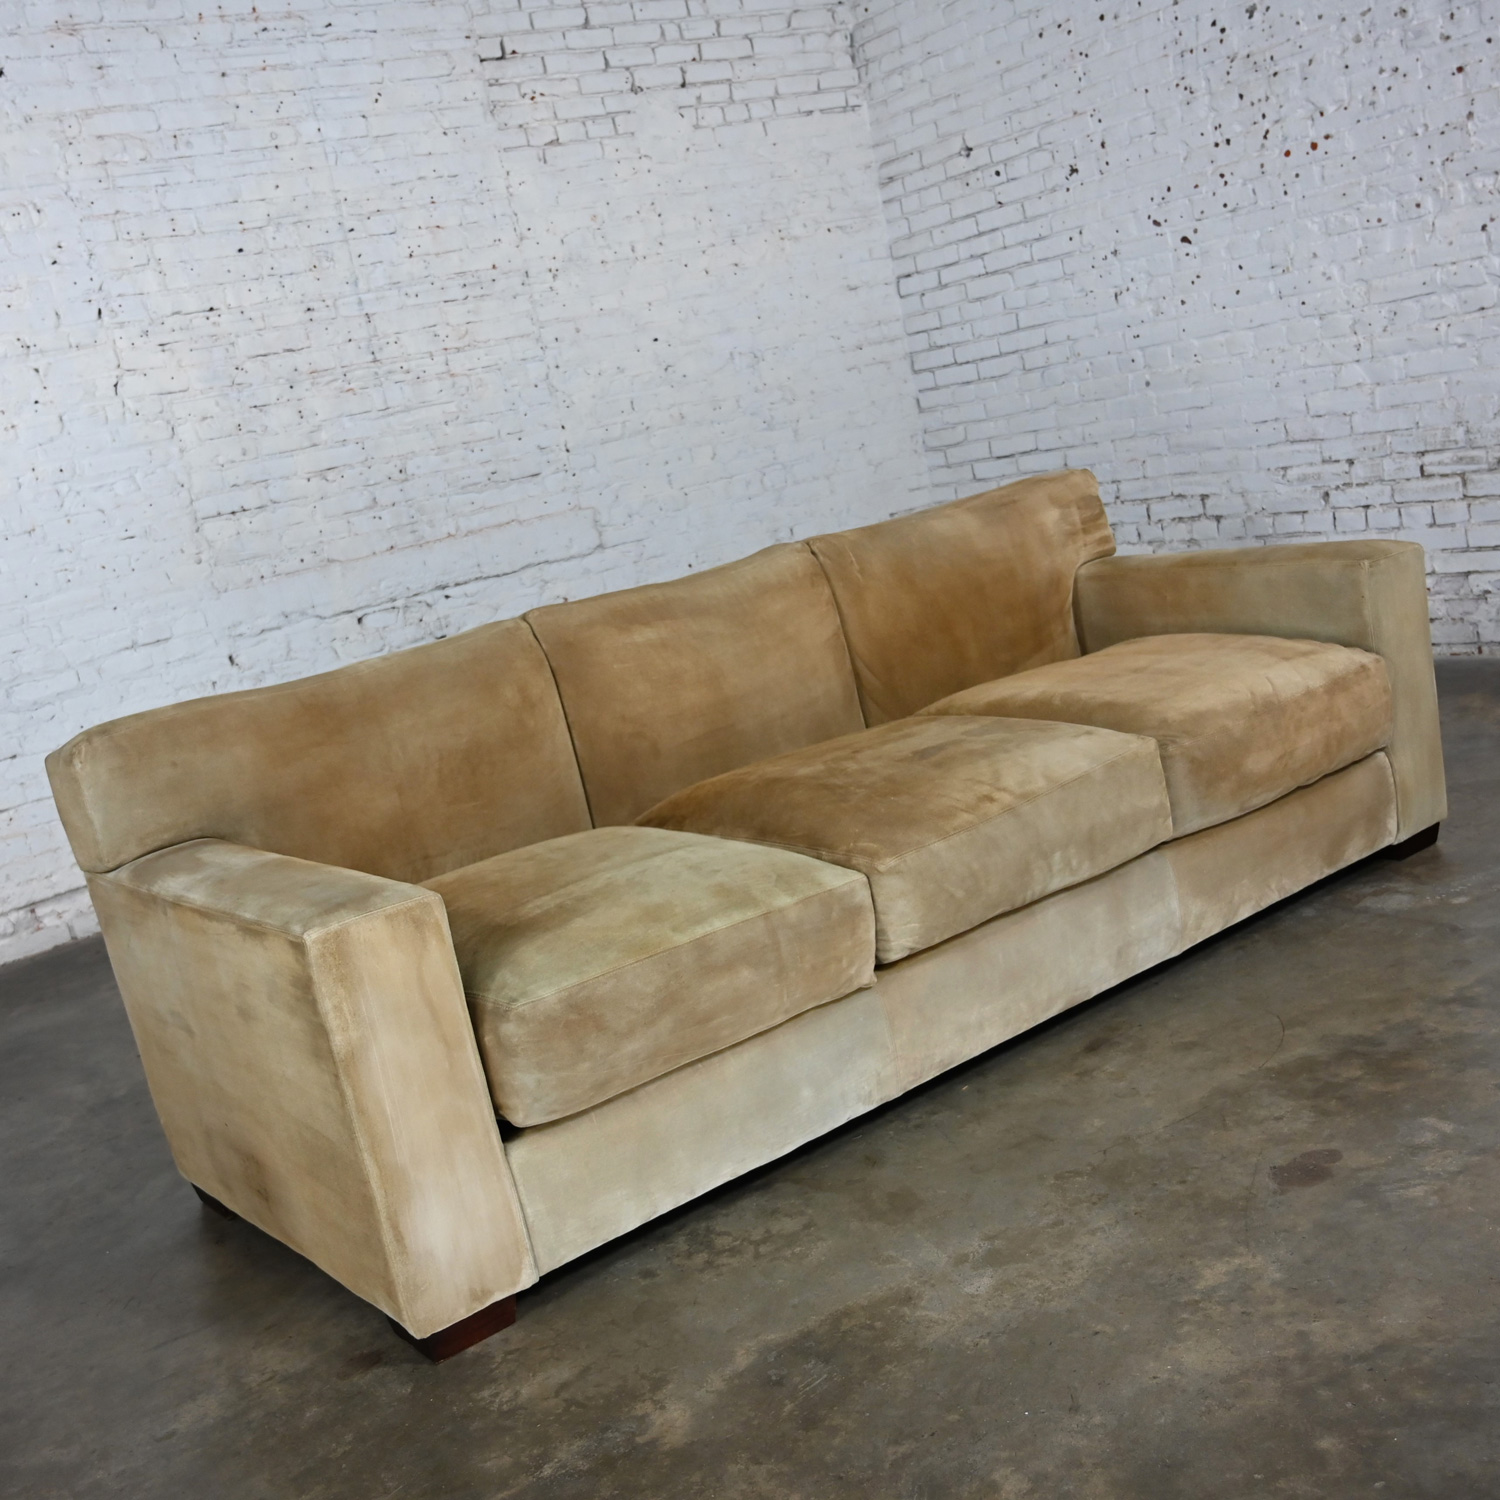 Late 20th Century Lawson Style Sofa By